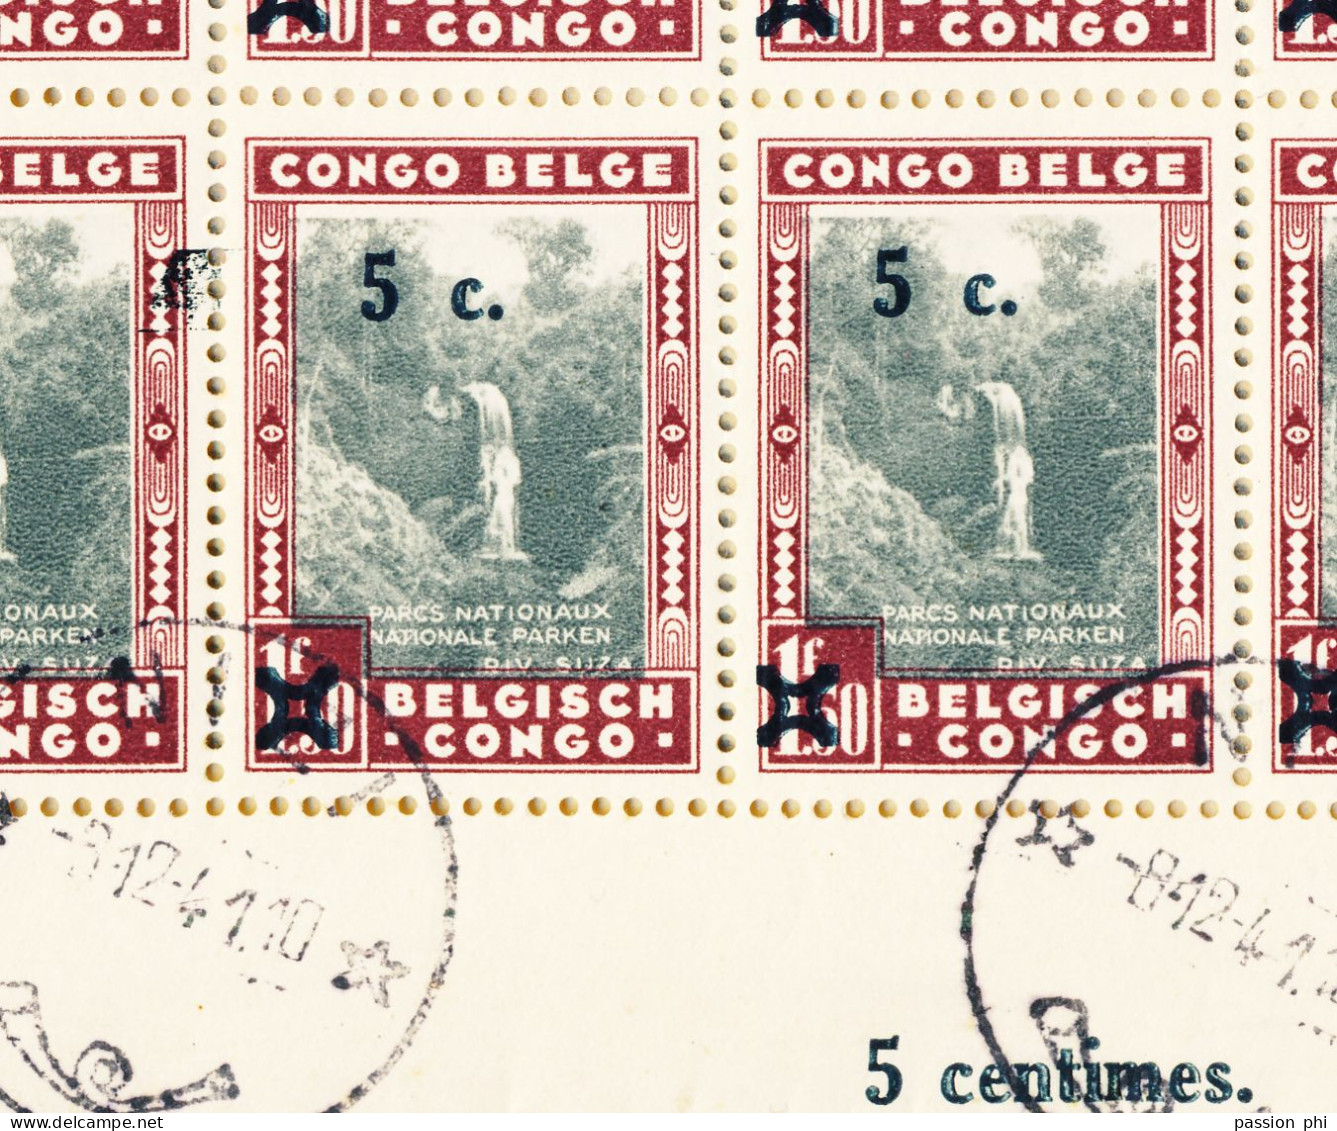 BELGIAN CONGO NATIONAL PARKS COB 226 COMPLETE SHEET USED (SHEET MARGINS MISSING) GUTTER AND VARIETY SMALL LAKE - Used Stamps